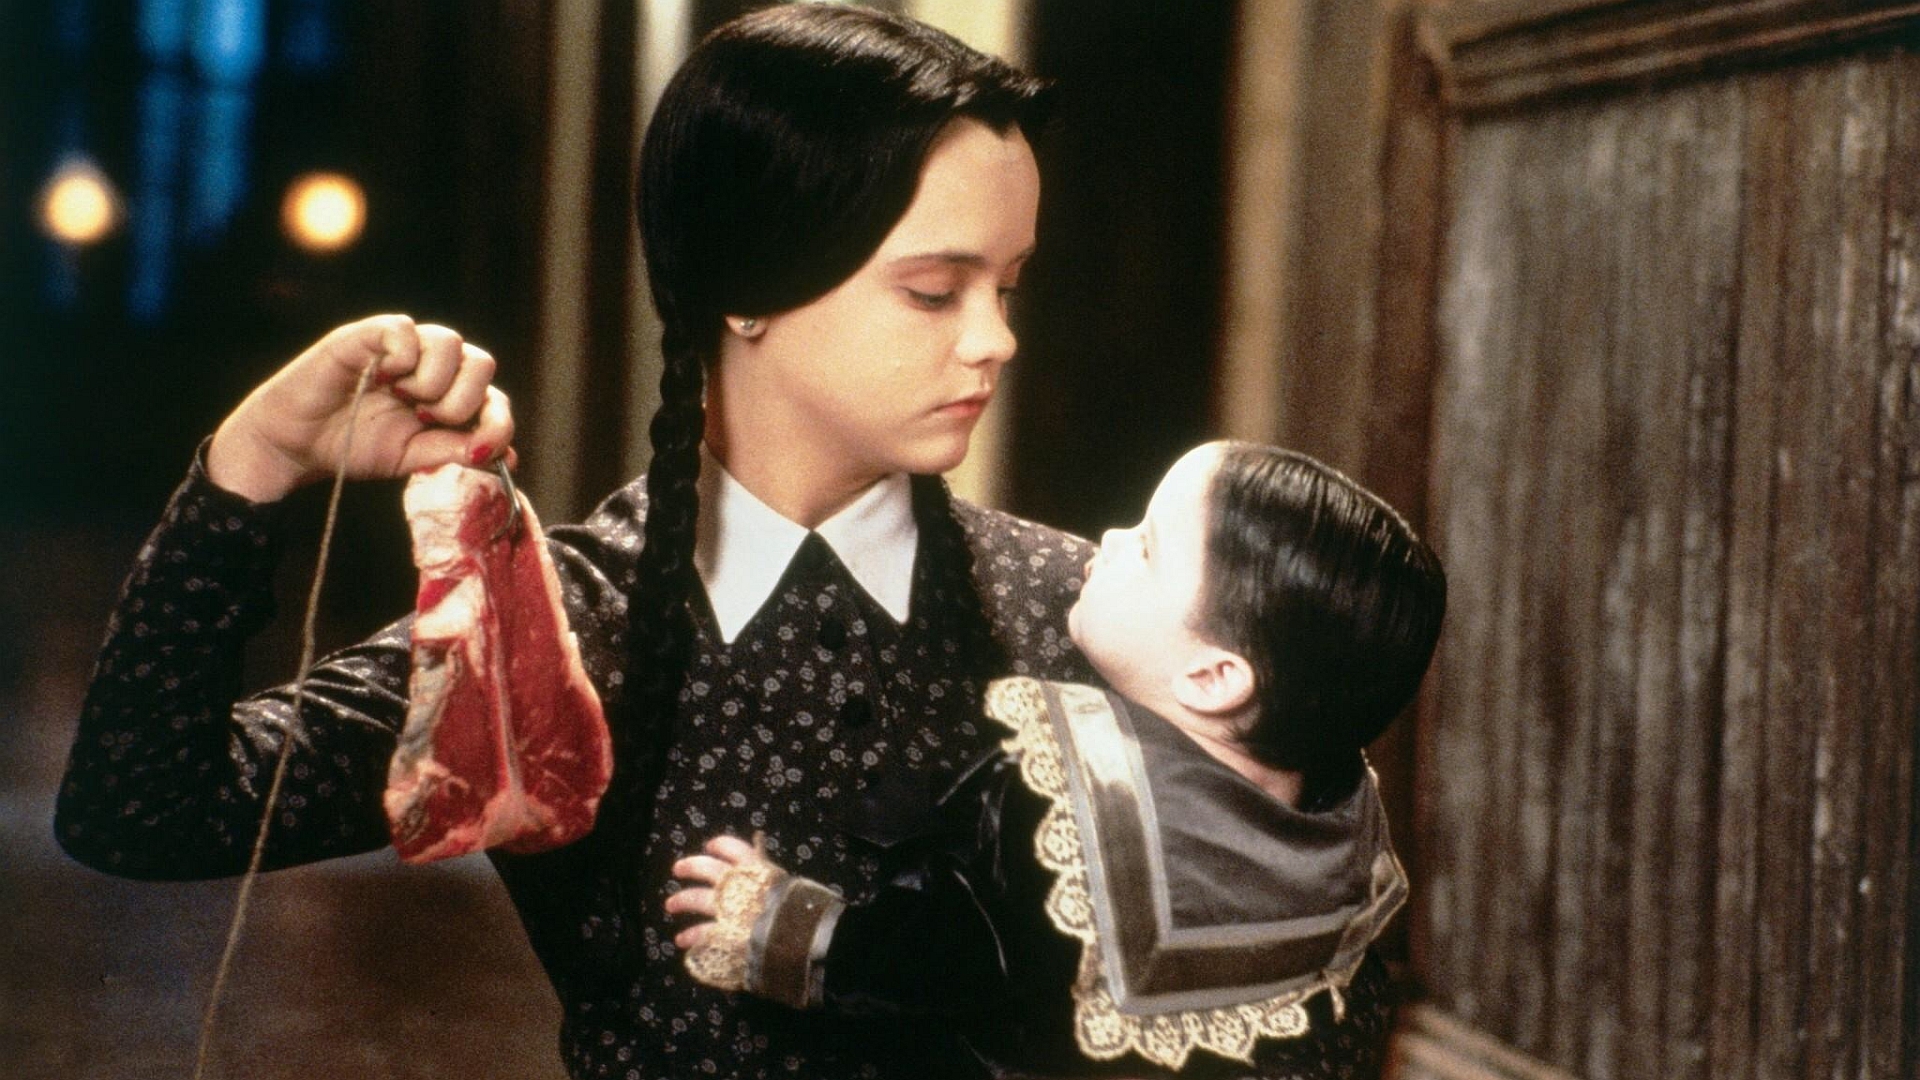 Movie Addams Family Values HD Wallpaper | Background Image